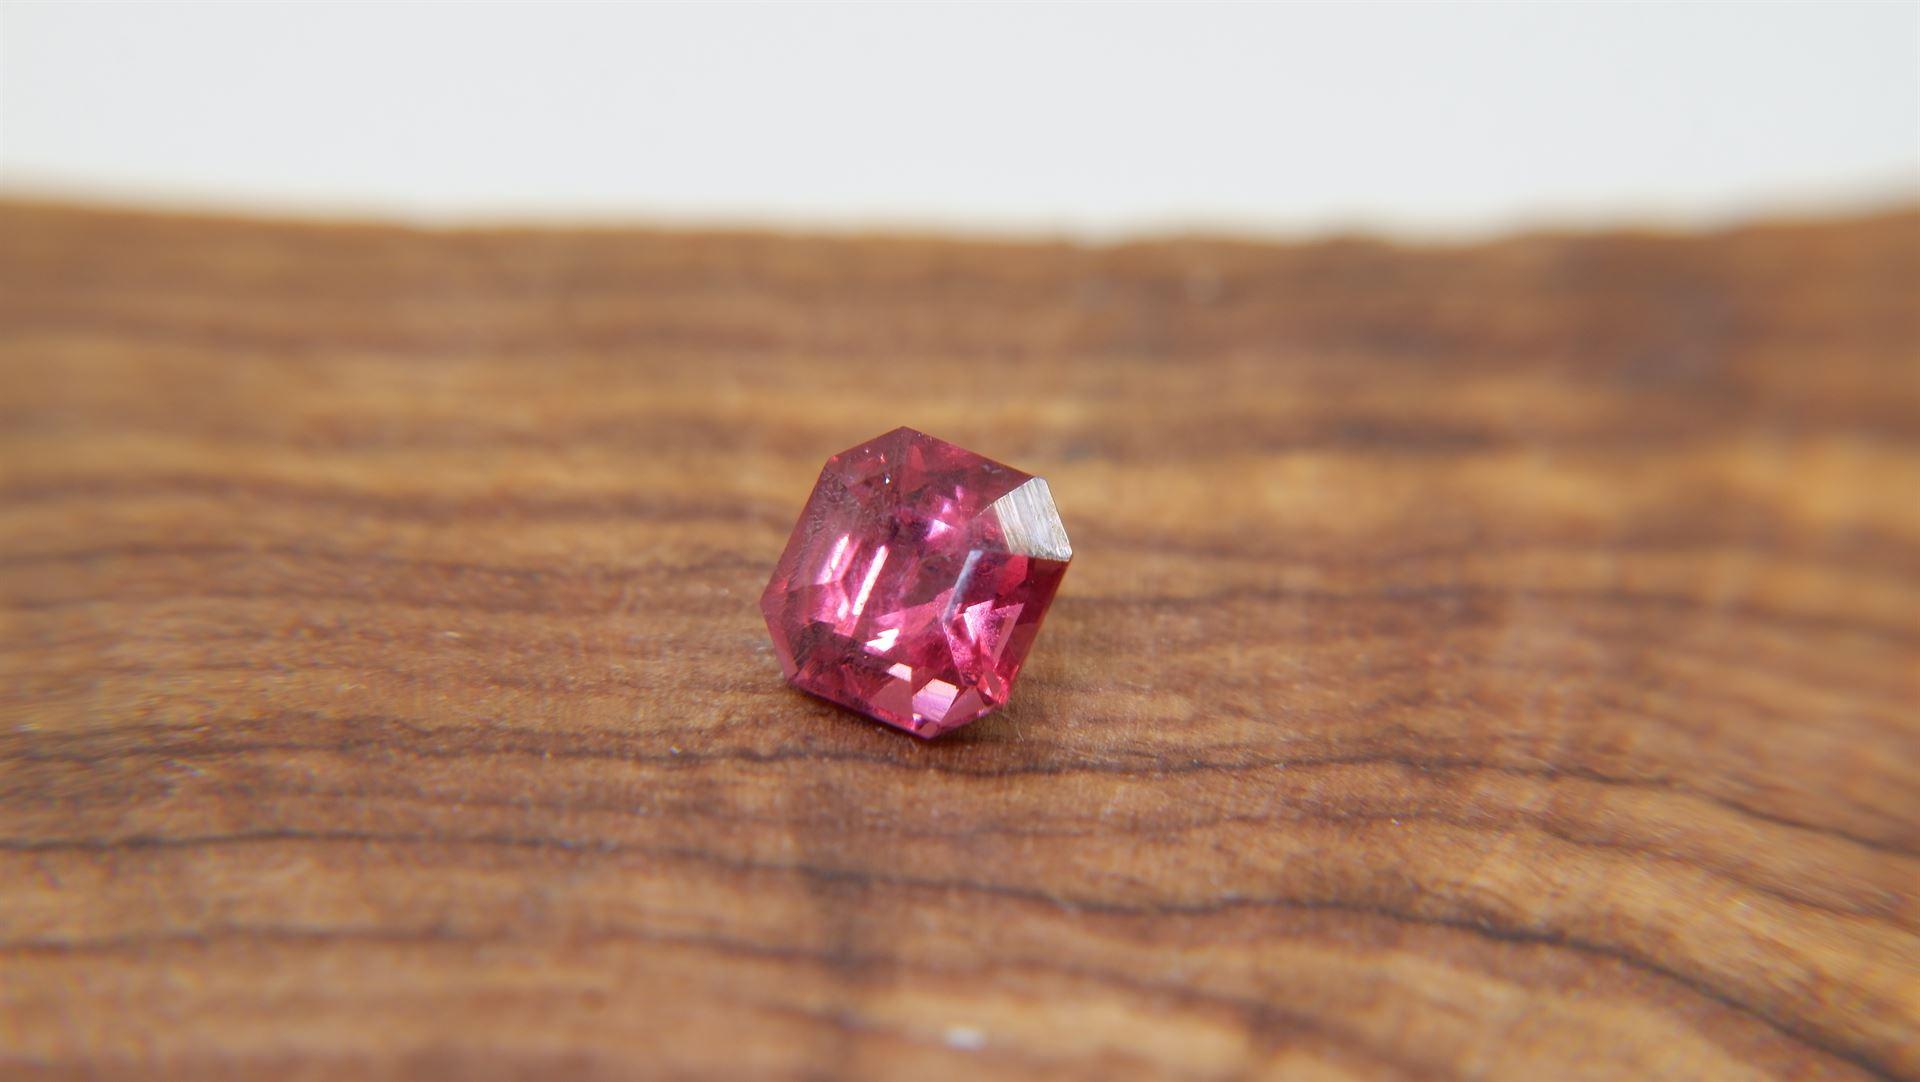 Women's or Men's 1.12 ct Padparadscha Sapphire, Unheated, GIR/GIA For Sale